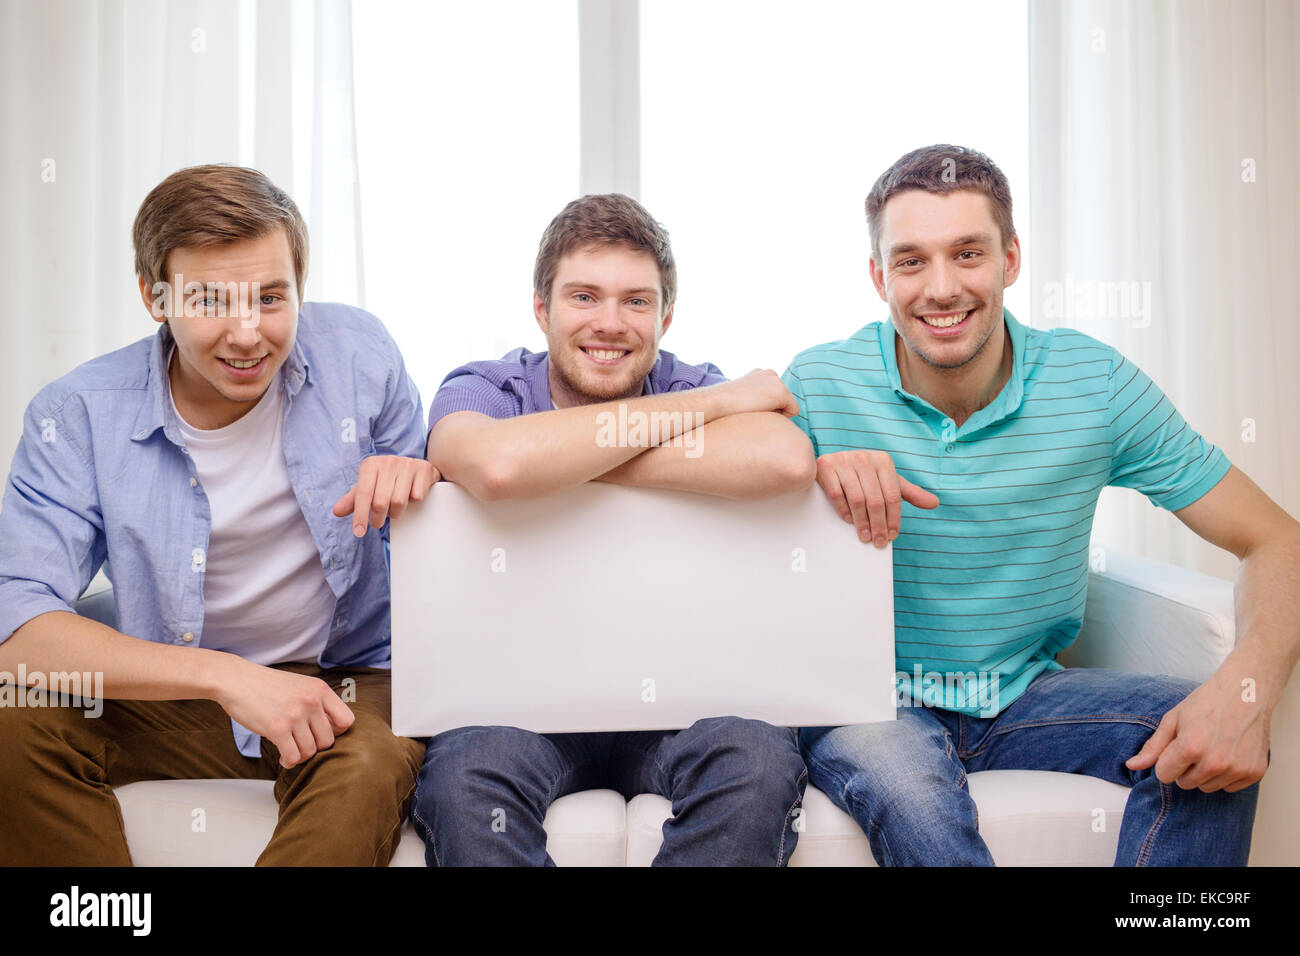 smiling male friends holding white blank board Stock Photo